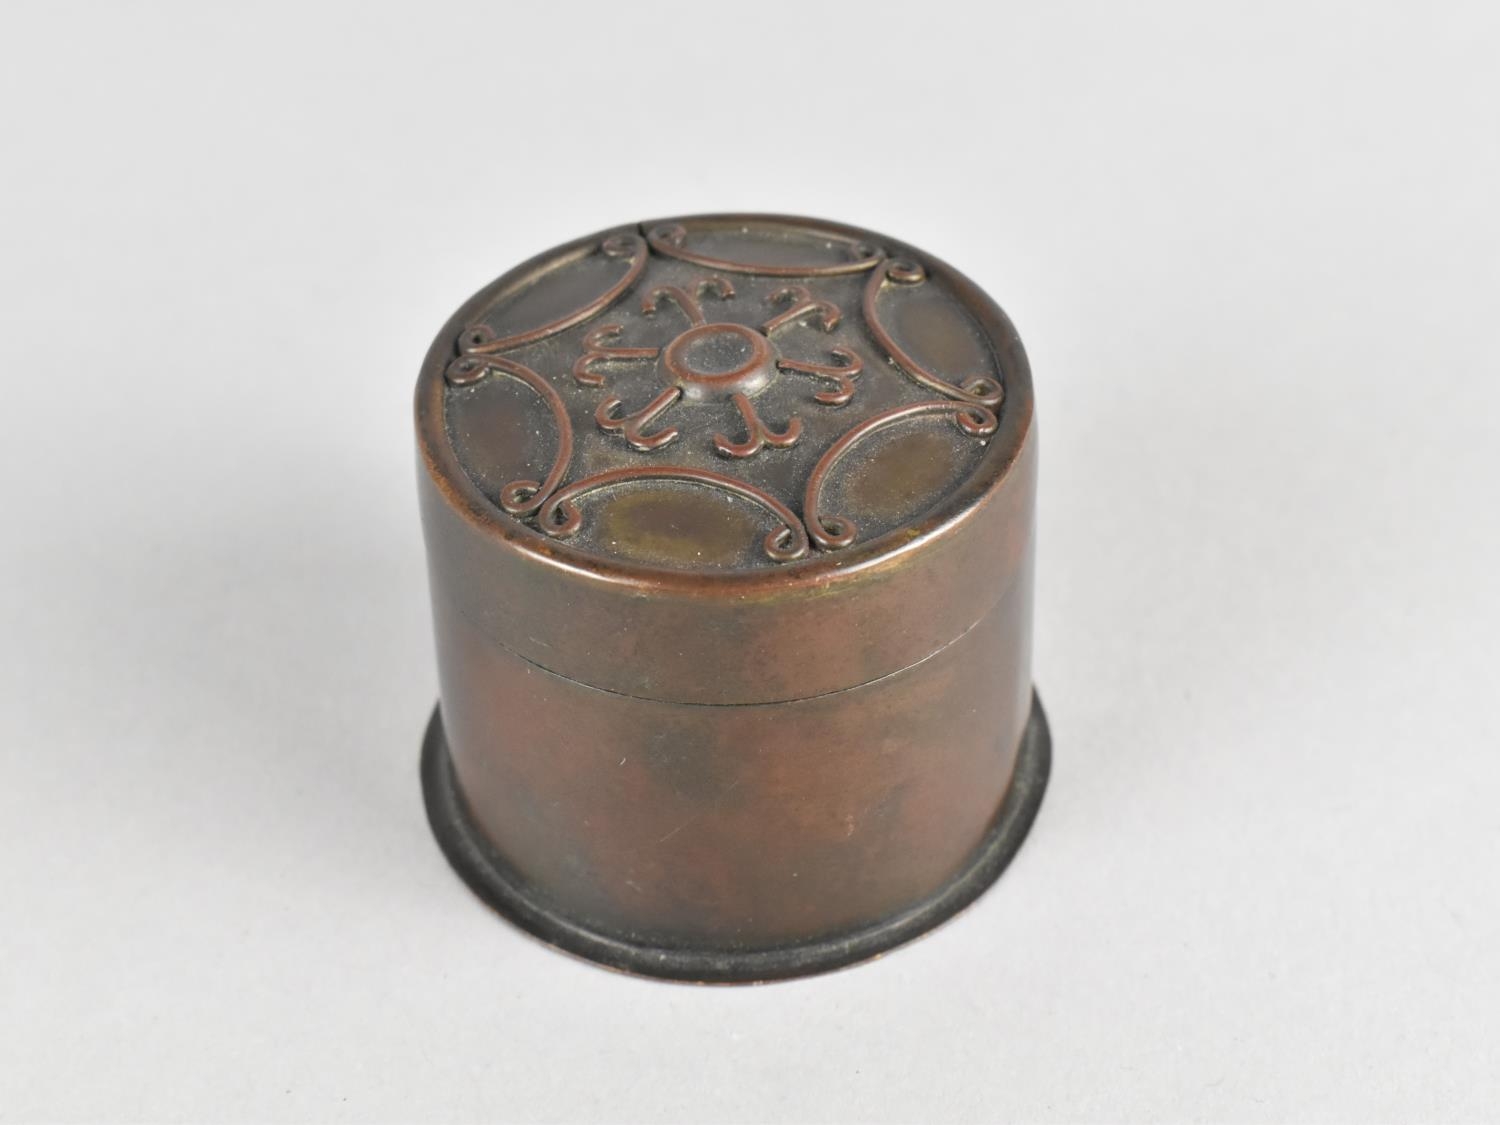 A Small Bronze Circular Trinket Box, the Lid with Relief Fleur De Lys Motif, 4cms High - Image 4 of 4